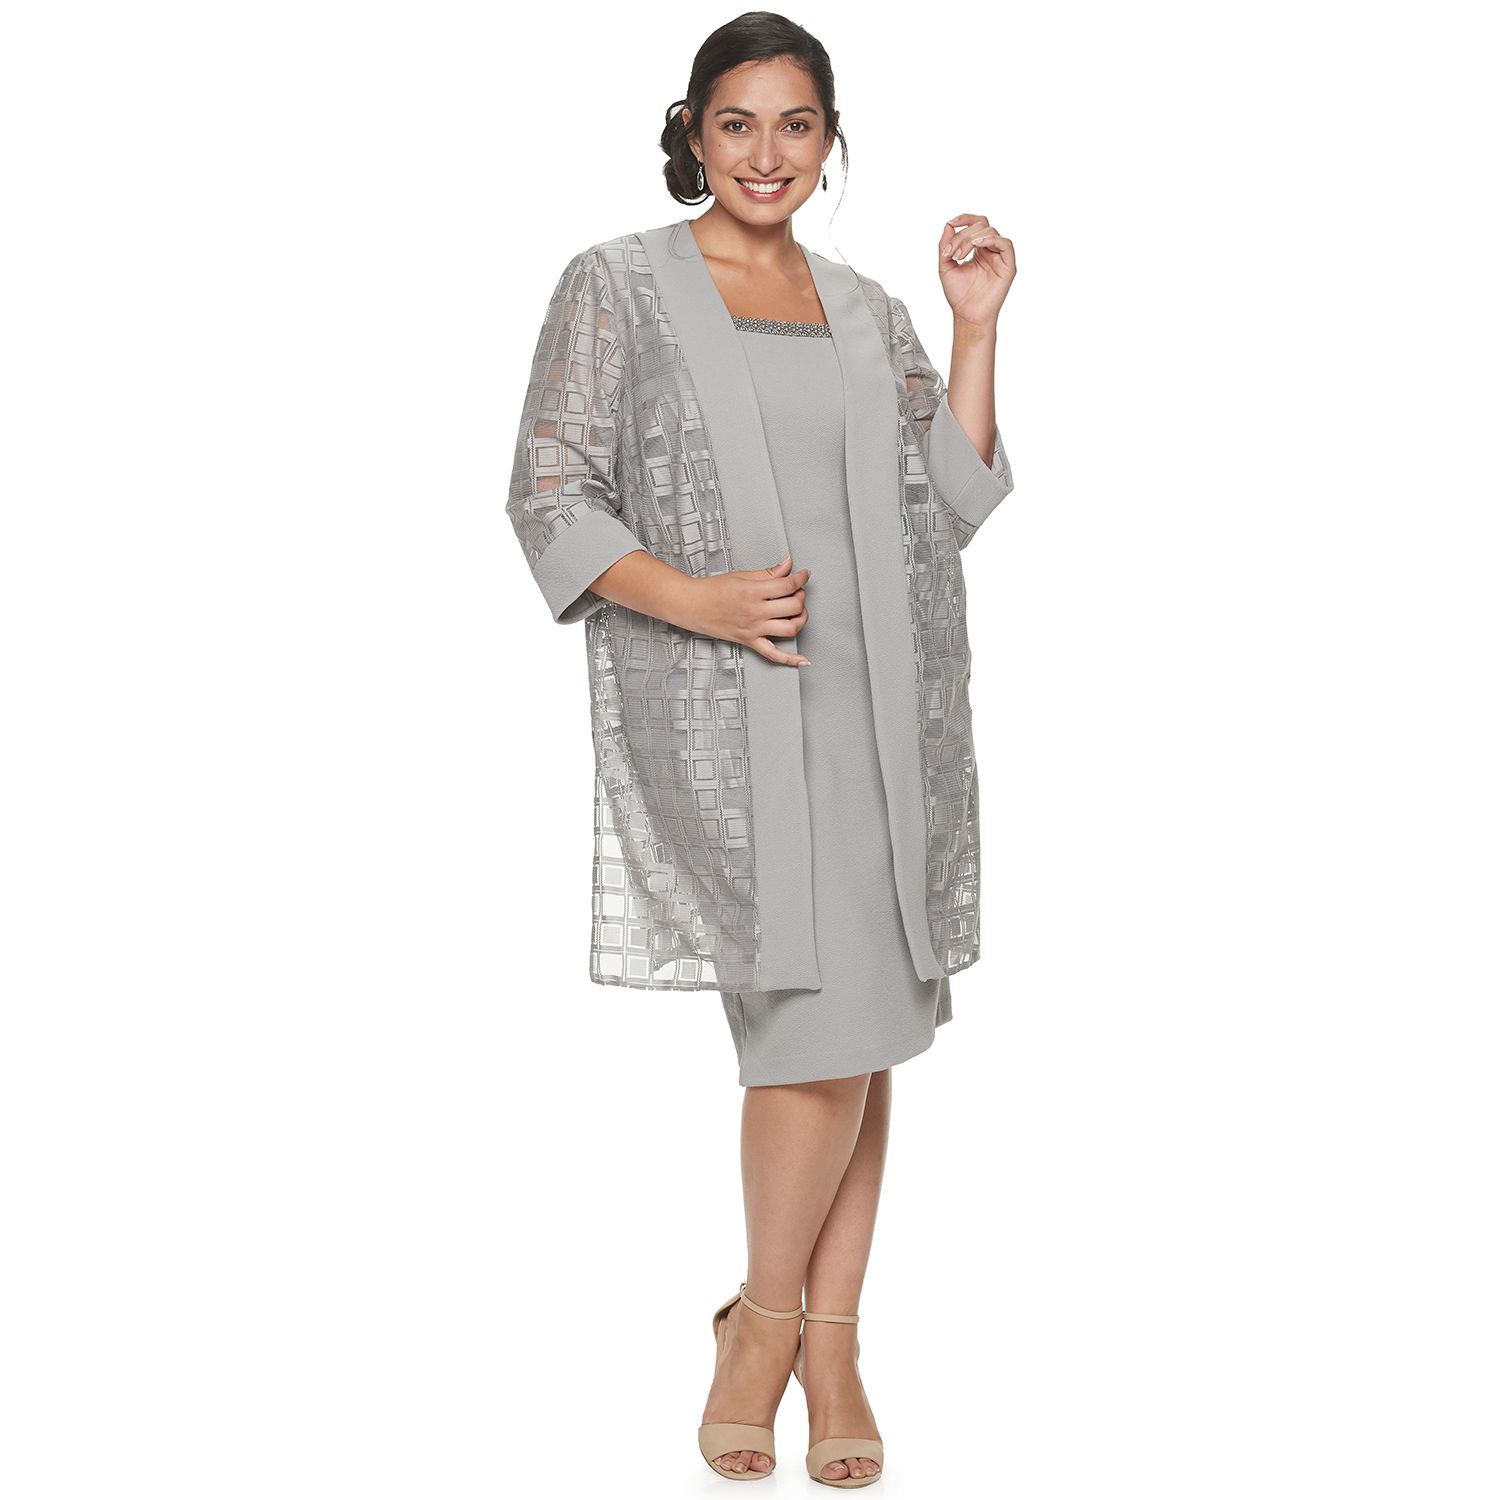 mother of the bride silver dresses plus size